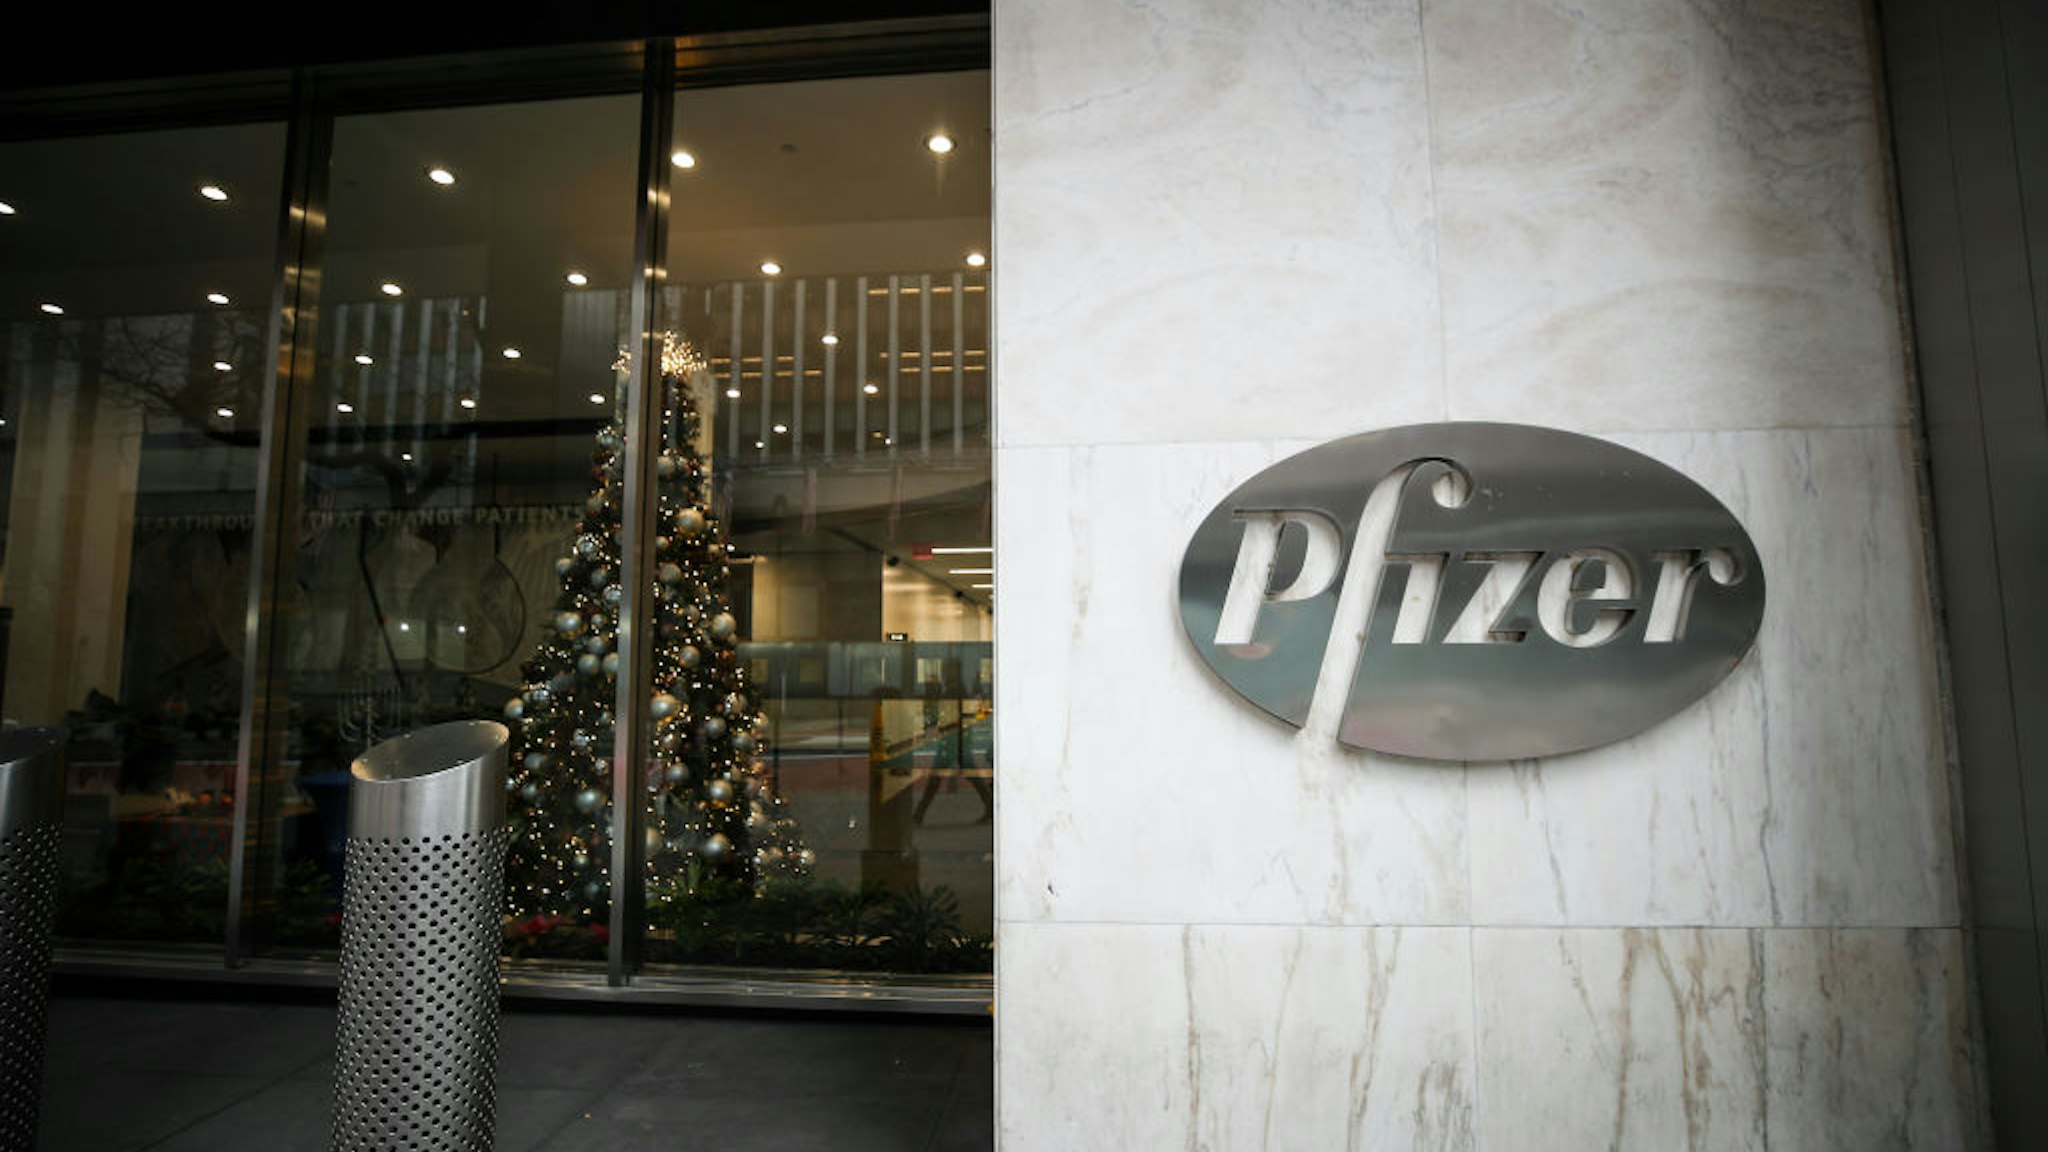 NEW YORK, USA - DECEMBER 02: Pfizer head quarter is seen in Manhattan, New York City, United States on December 2, 2020. Pfizer/BioNTech coronavirus vaccine to be available next week in UK following regulator approval.